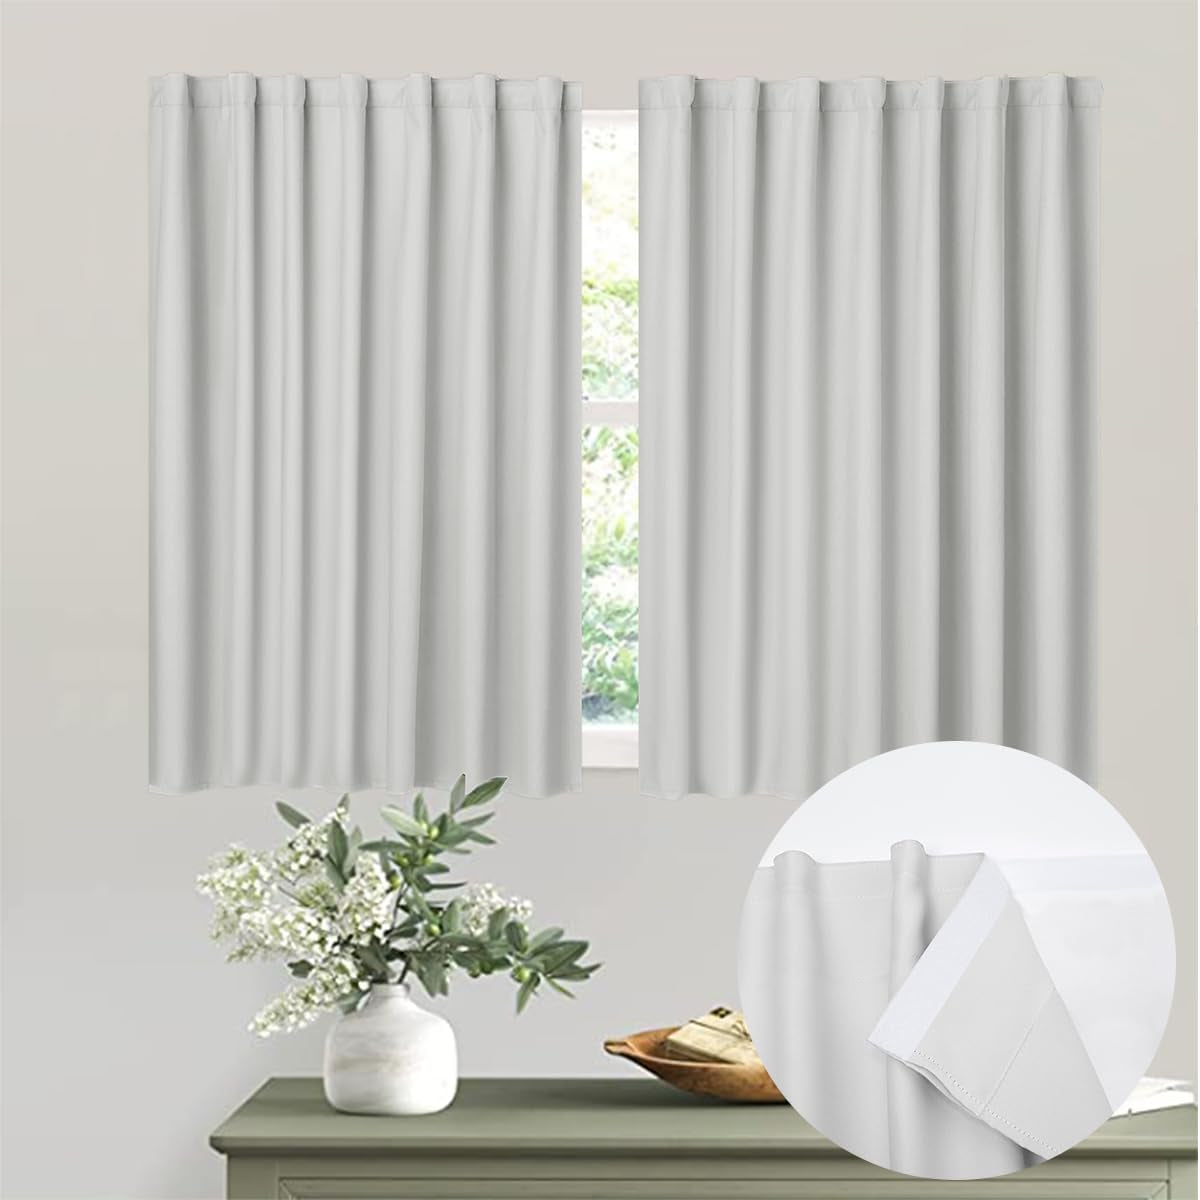 Muamar 2Pcs Blackout Curtains Privacy Curtains 63 Inch Length Window Curtains,Easy Install Thermal Insulated Window Shades,Stick Curtains No Rods, Black 42" W X 63" L  Muamar White 29"W X 36"L 